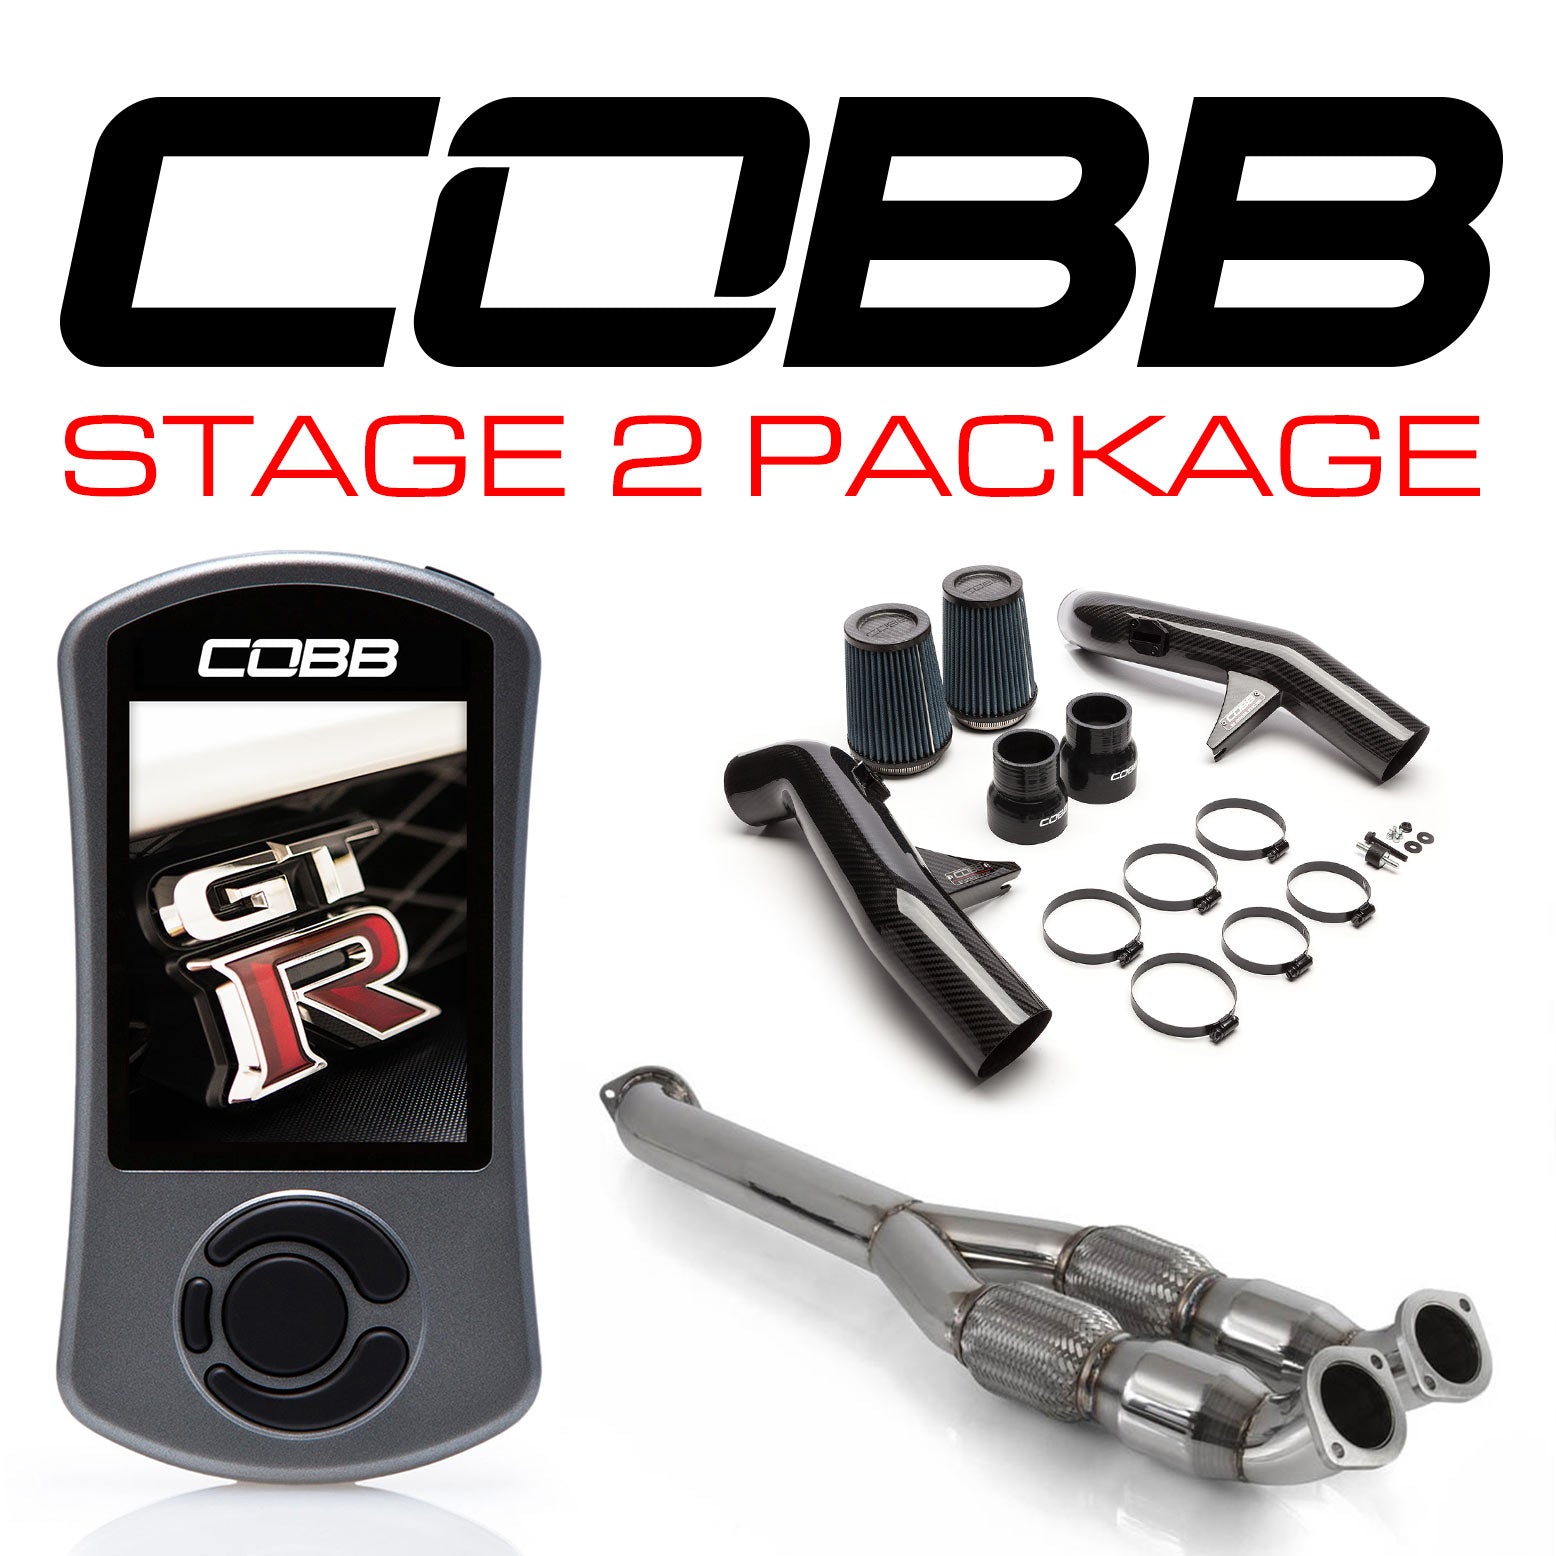 NISSAN GT-R STAGE 2 CARBON FIBER POWER PACKAGE NIS-008 WITH TCM FLASHING